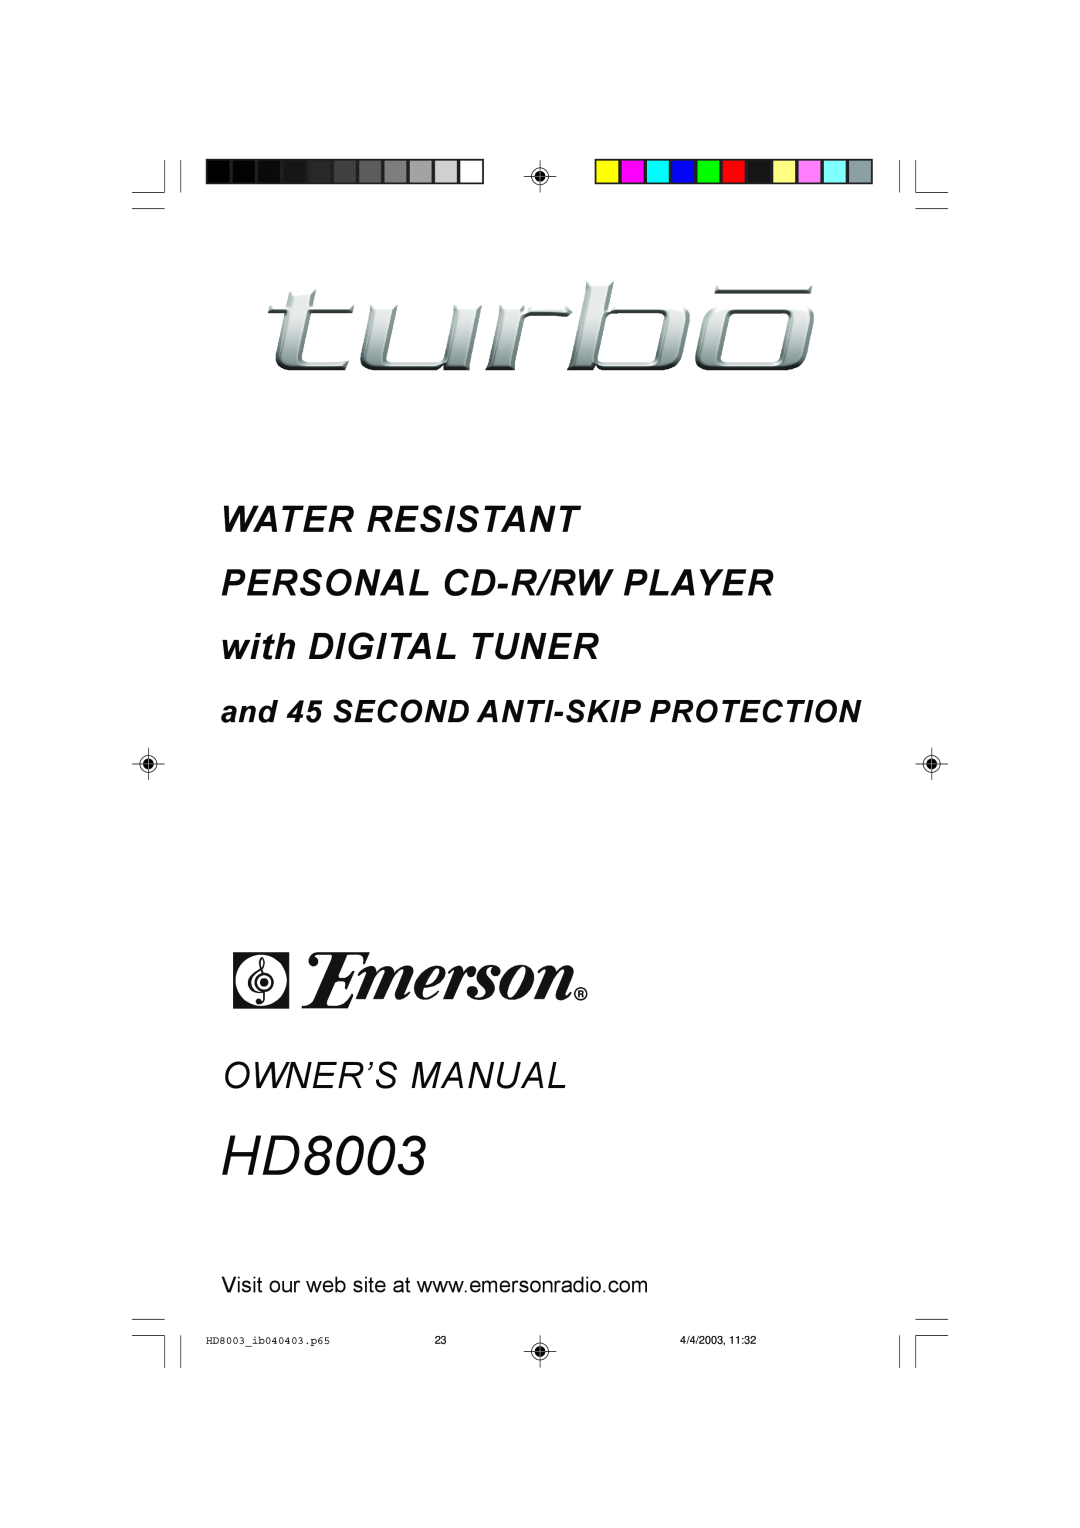 Emerson owner manual Owner’S Manual, and 45 SECOND ANTI-SKIPPROTECTION, HD8003_ib040403.p65, 4/2003, 11:32 